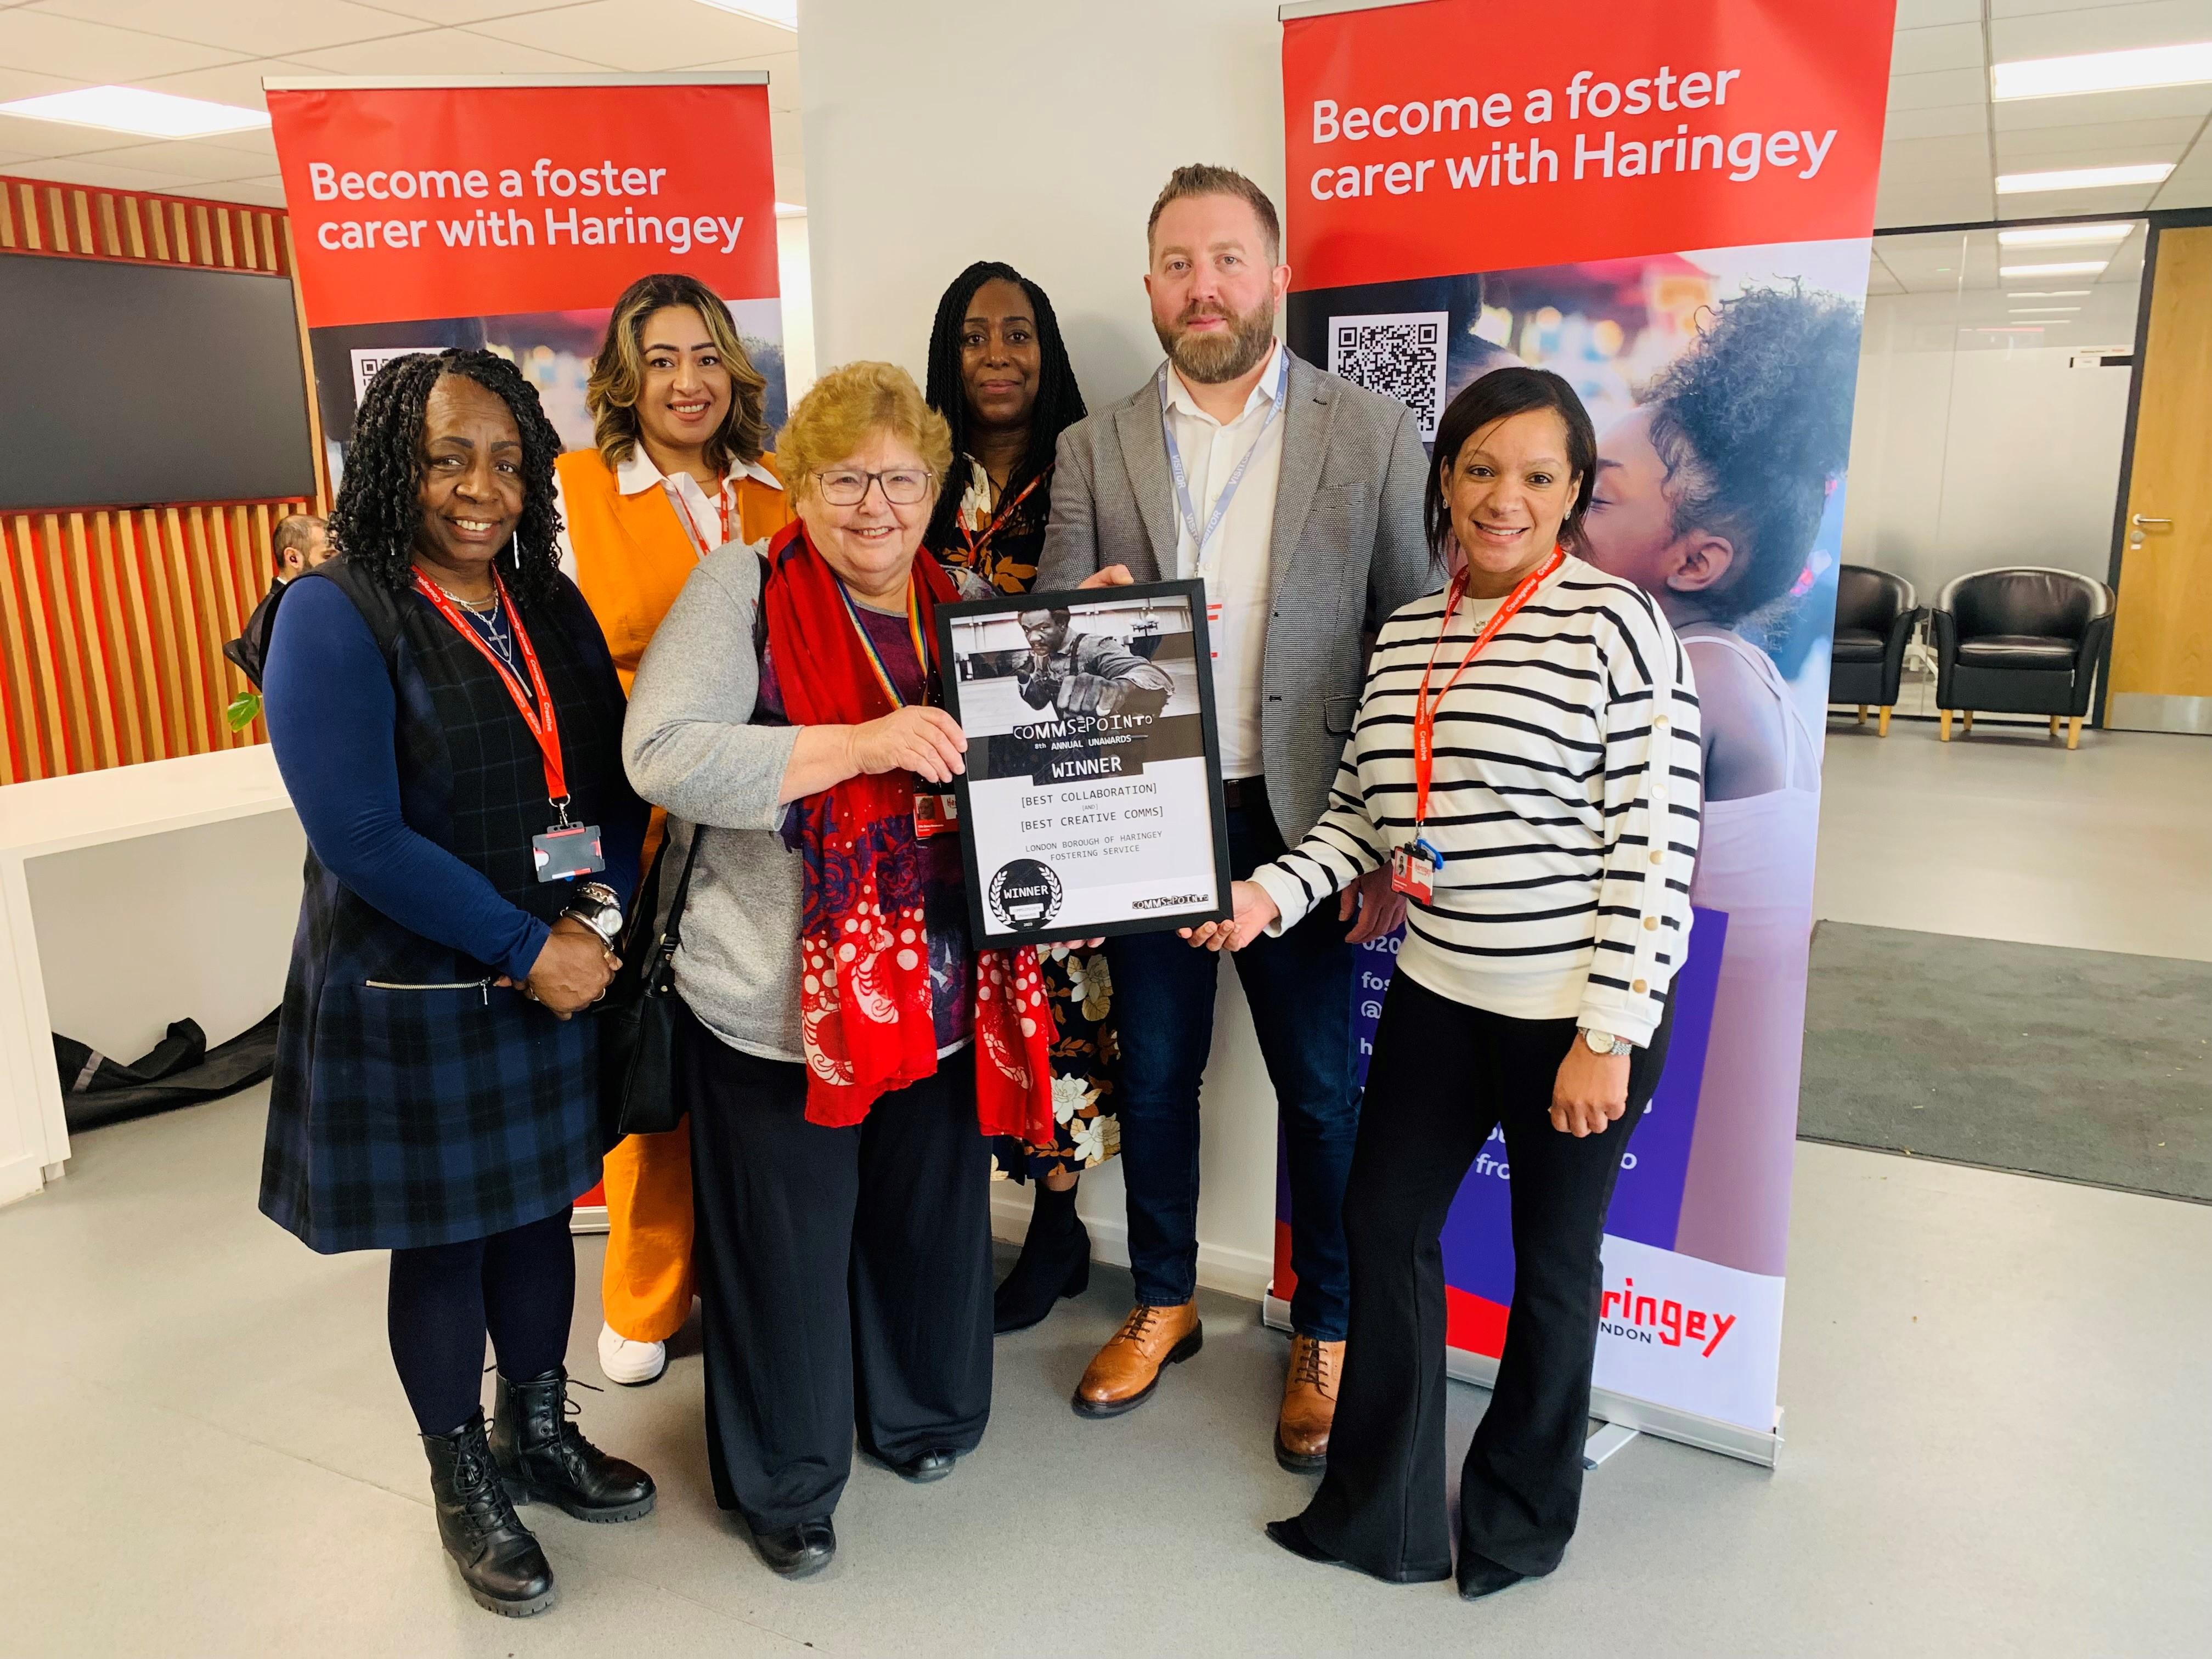 fostering team with Cllr Zena Brabazon receiving the Comms2point0 award